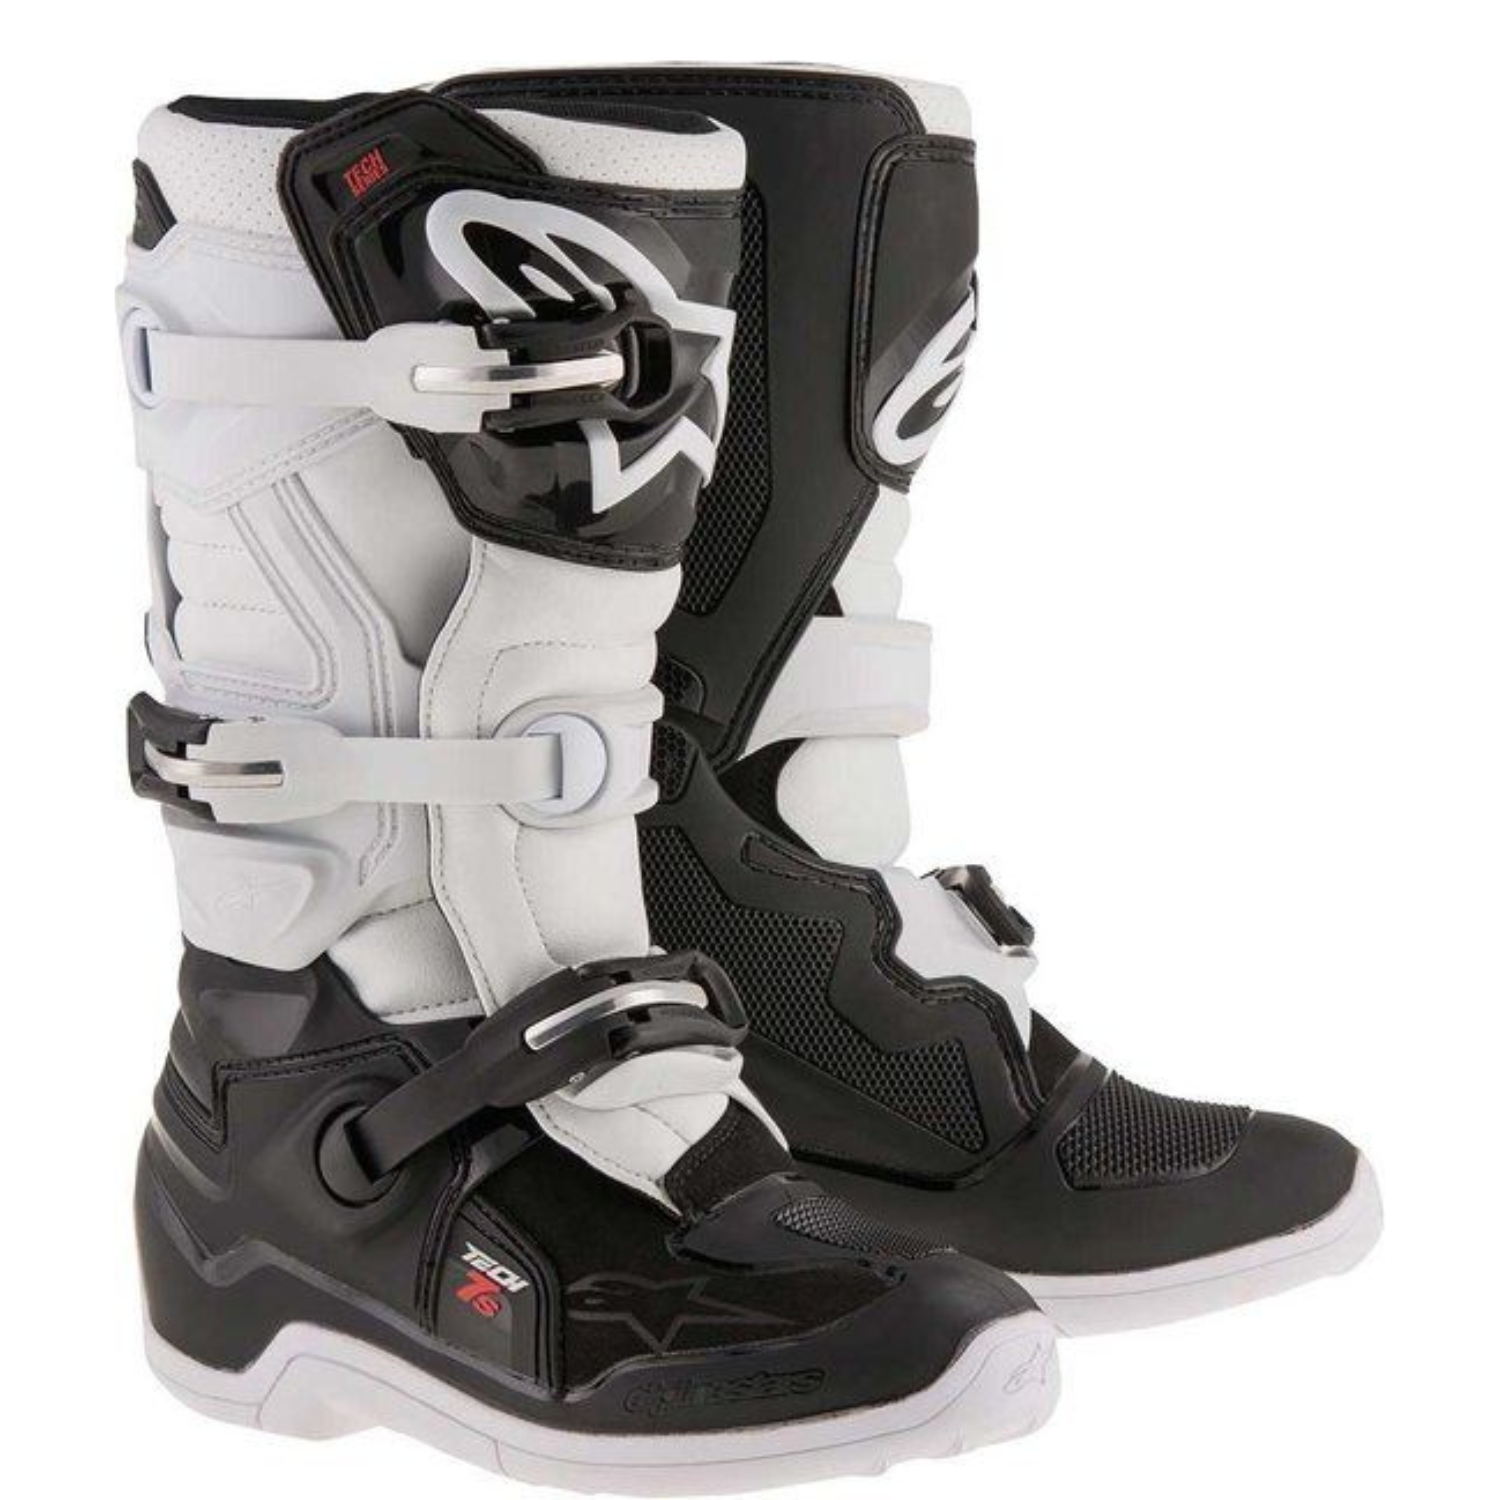 Image of Alpinestars Tech 7 S Black White Boots Taille US 4